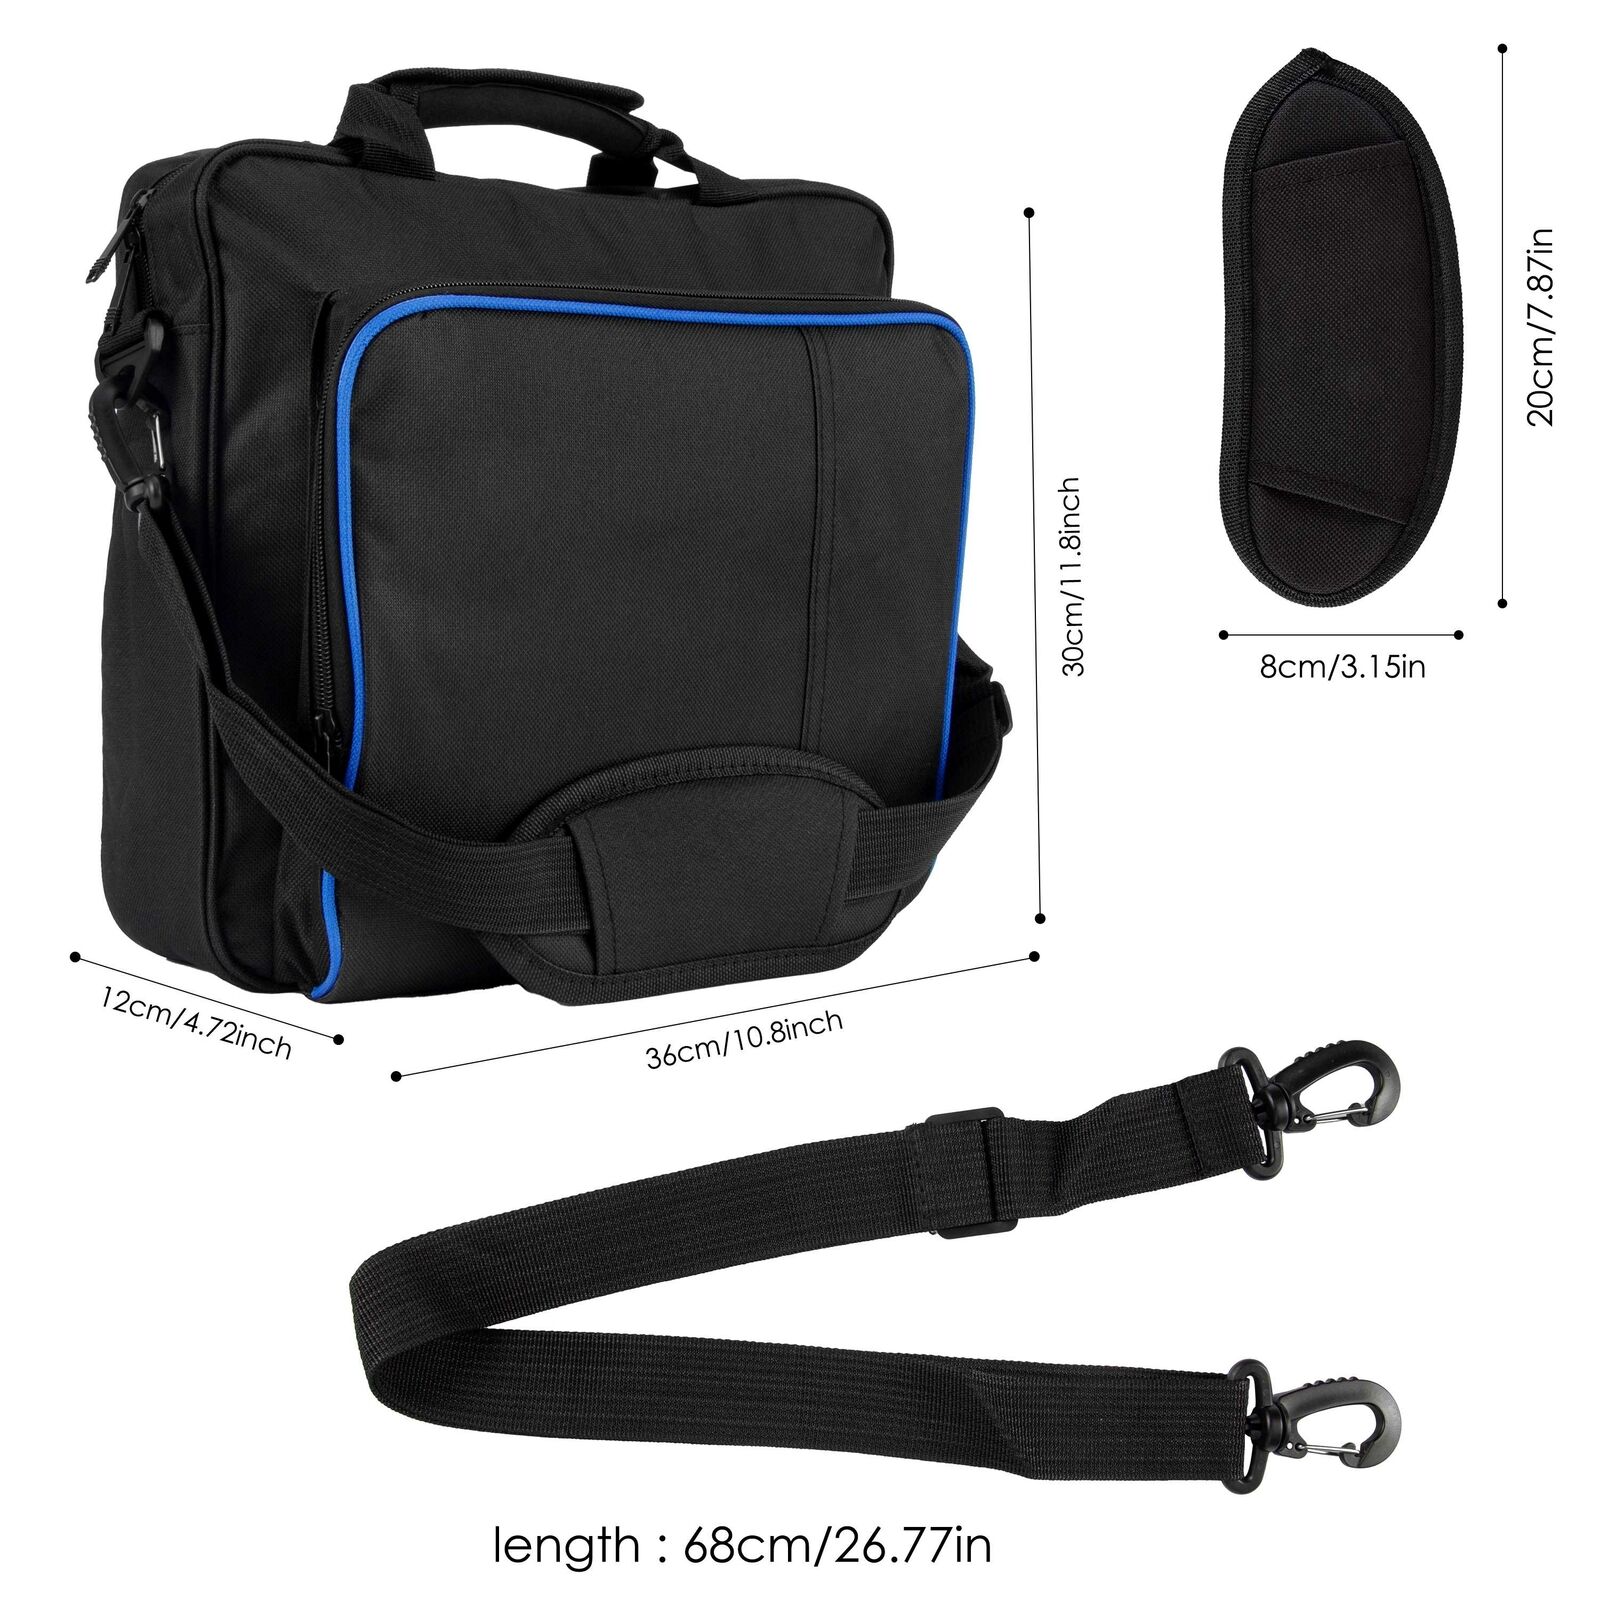 Multi-function Travel Carry Case Storage Carrying Bag For PlayStation 4 PS4